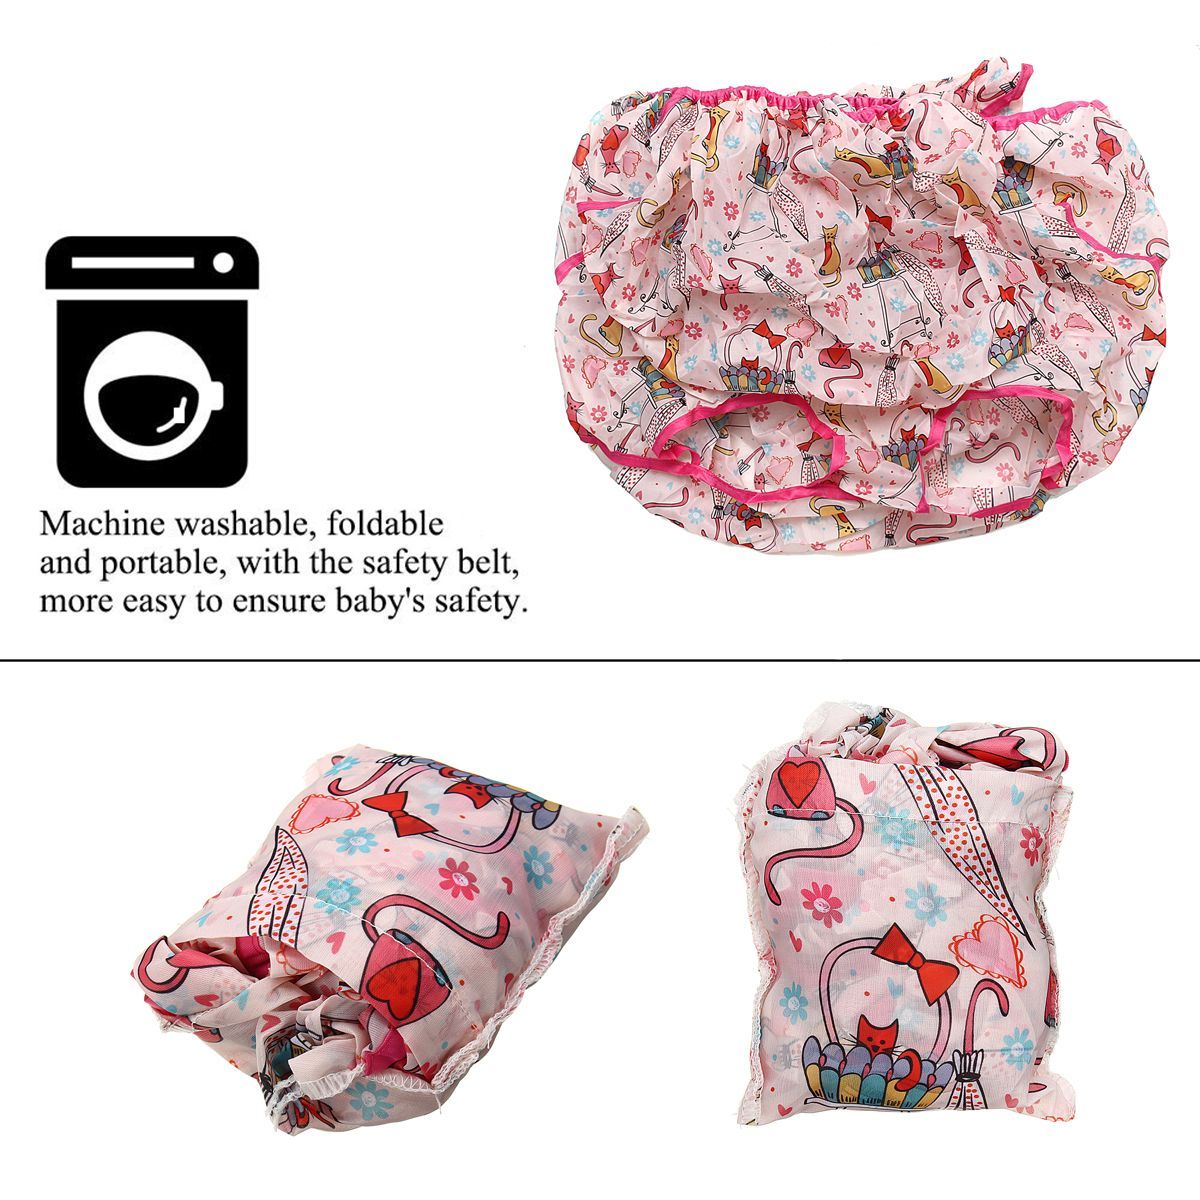 Infant-Baby-Kids-Shopping-Trolley-Cart-Seat-High-Chair-Cover-Protector-Foldable-1528169